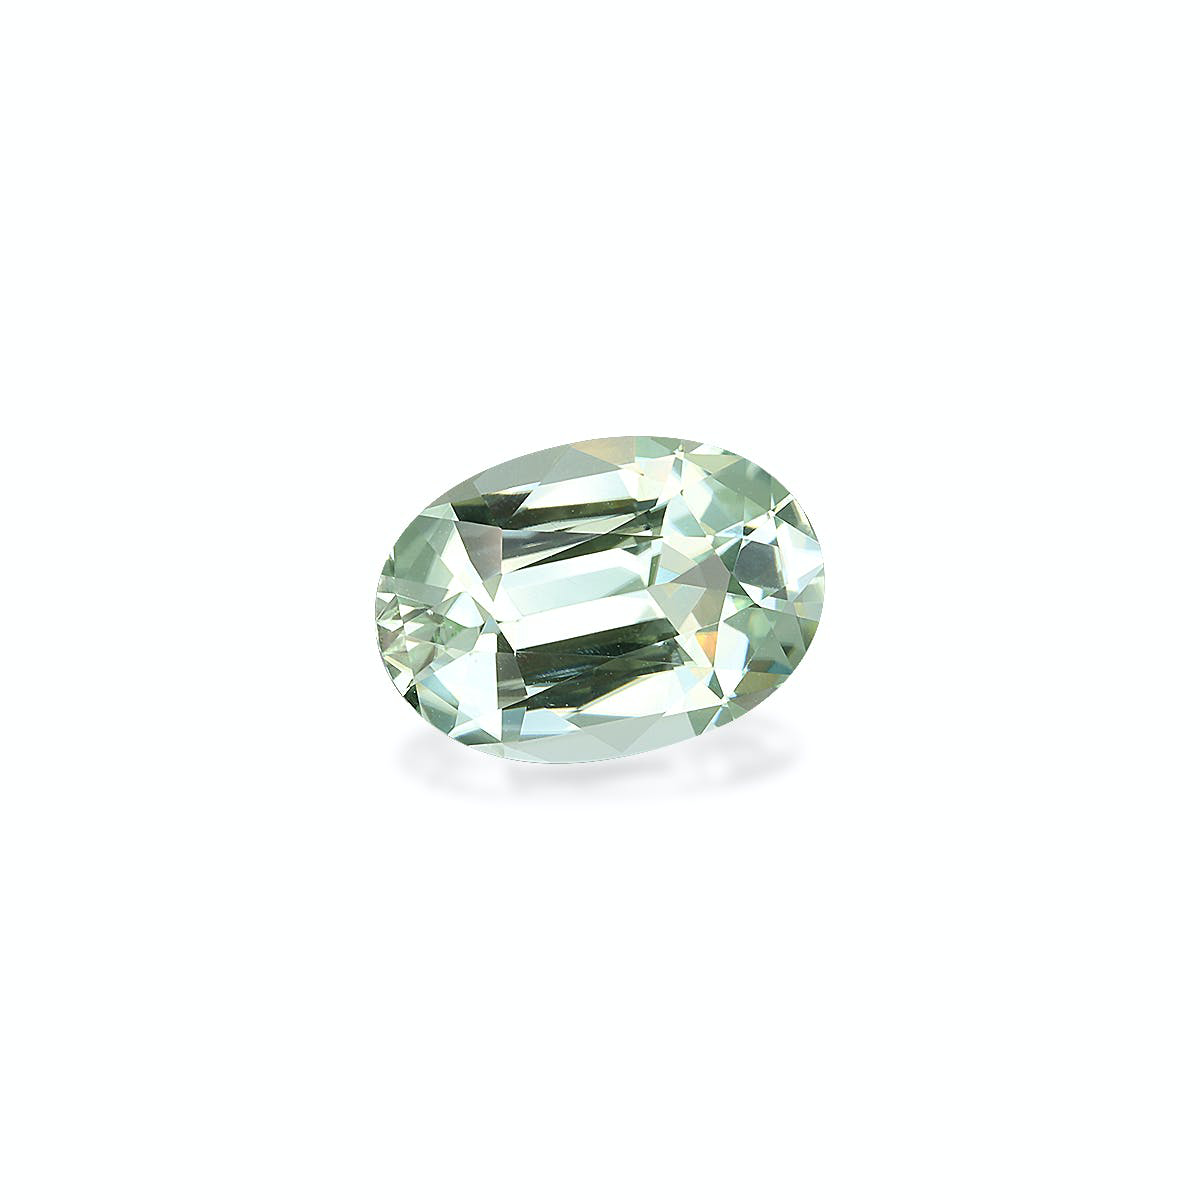 Picture of Mist Green Tourmaline 5.01ct (TG1539)